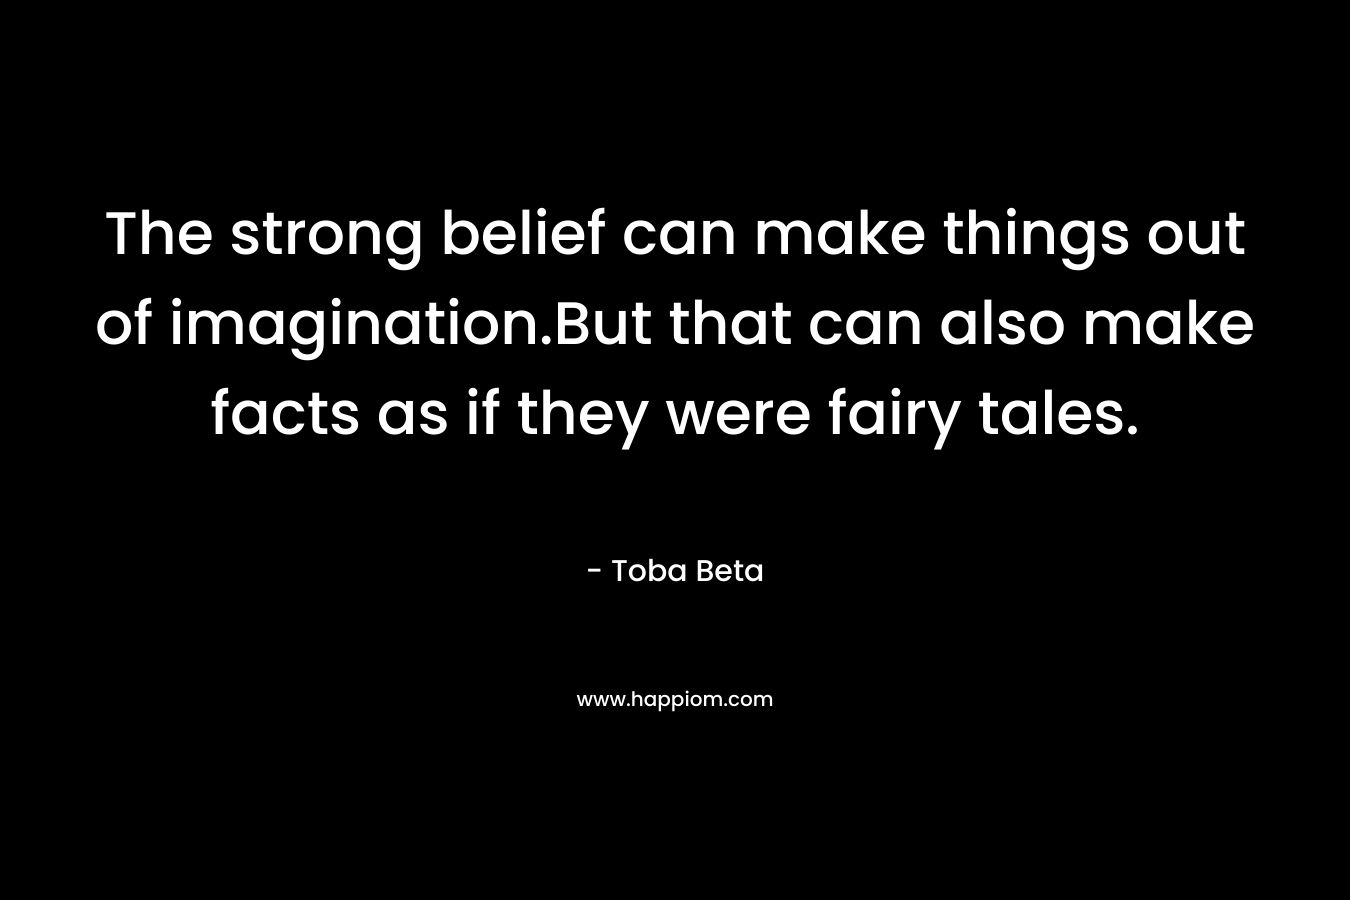 The strong belief can make things out of imagination.But that can also make facts as if they were fairy tales.